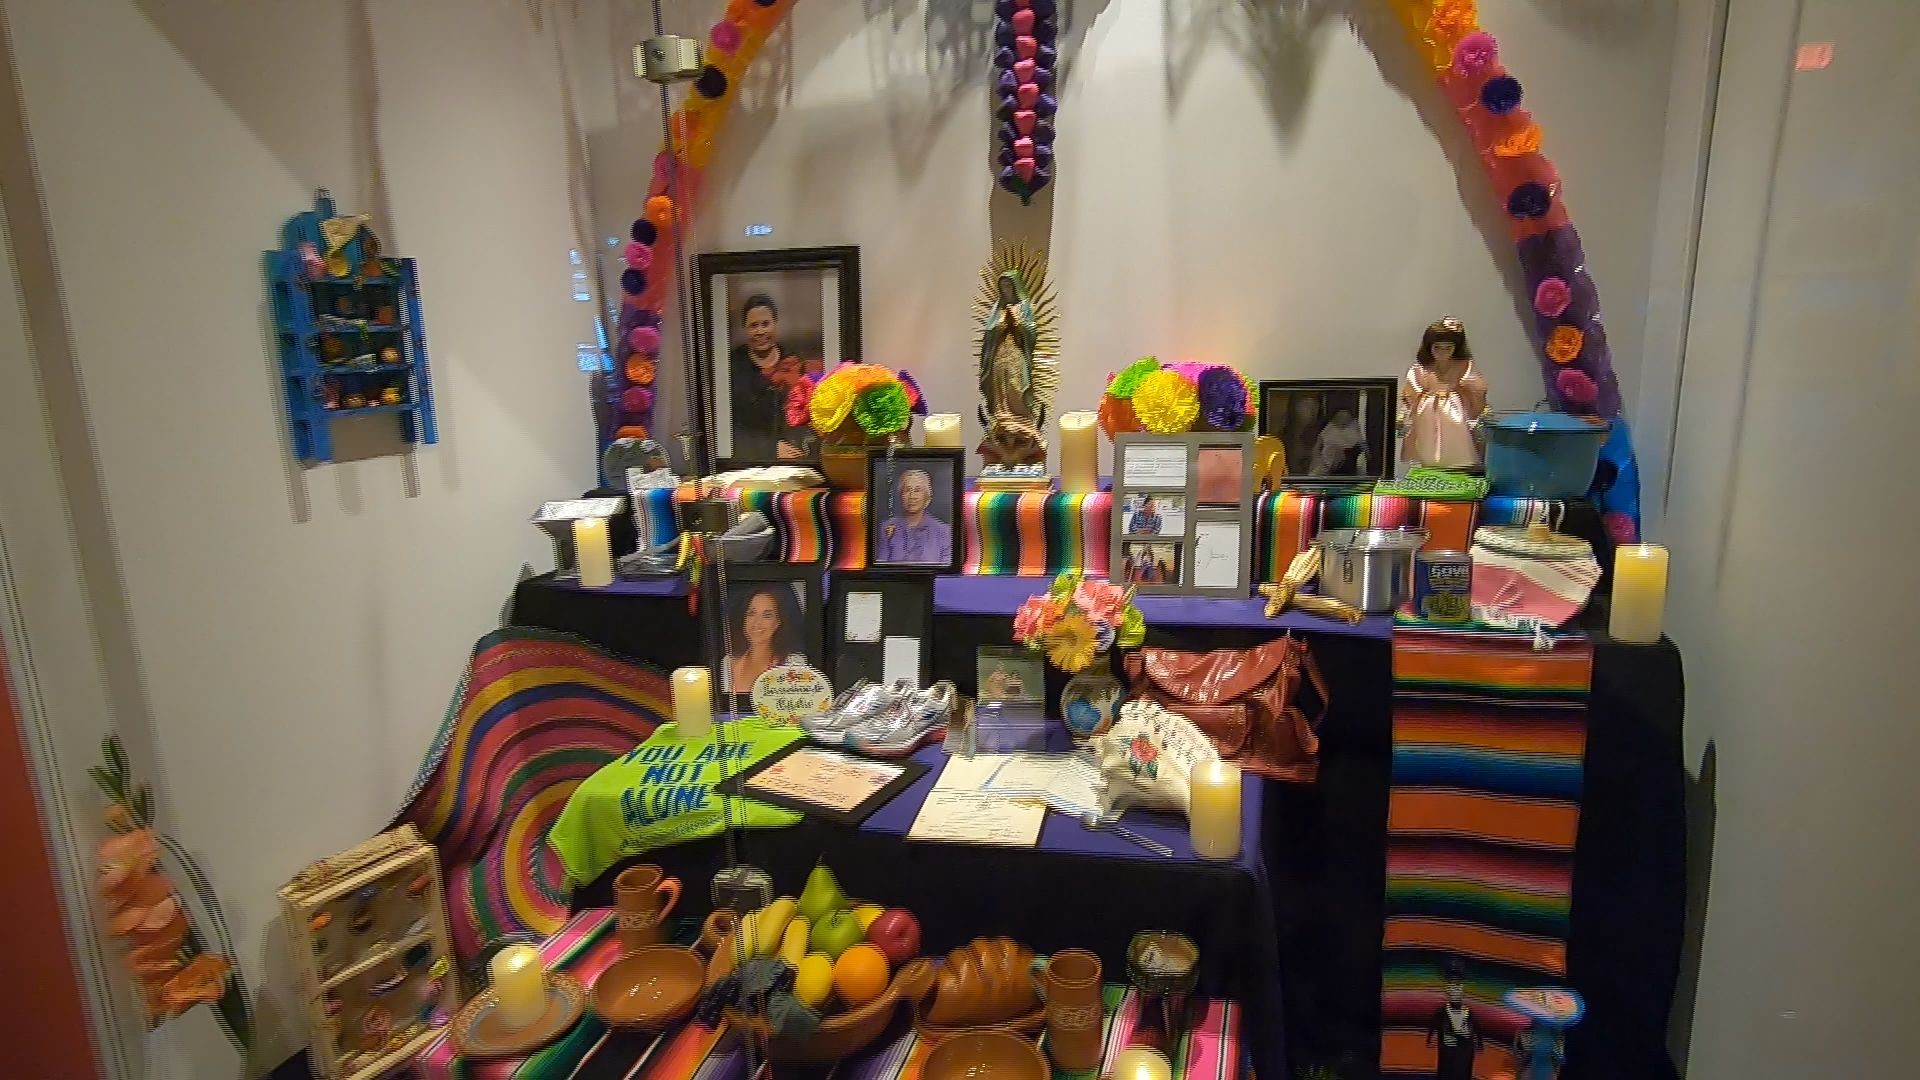 A new exhibit that celebrates the Day of the Dead is coming to the Grand Rapids Public Museum from the Field Museum in Chicago.